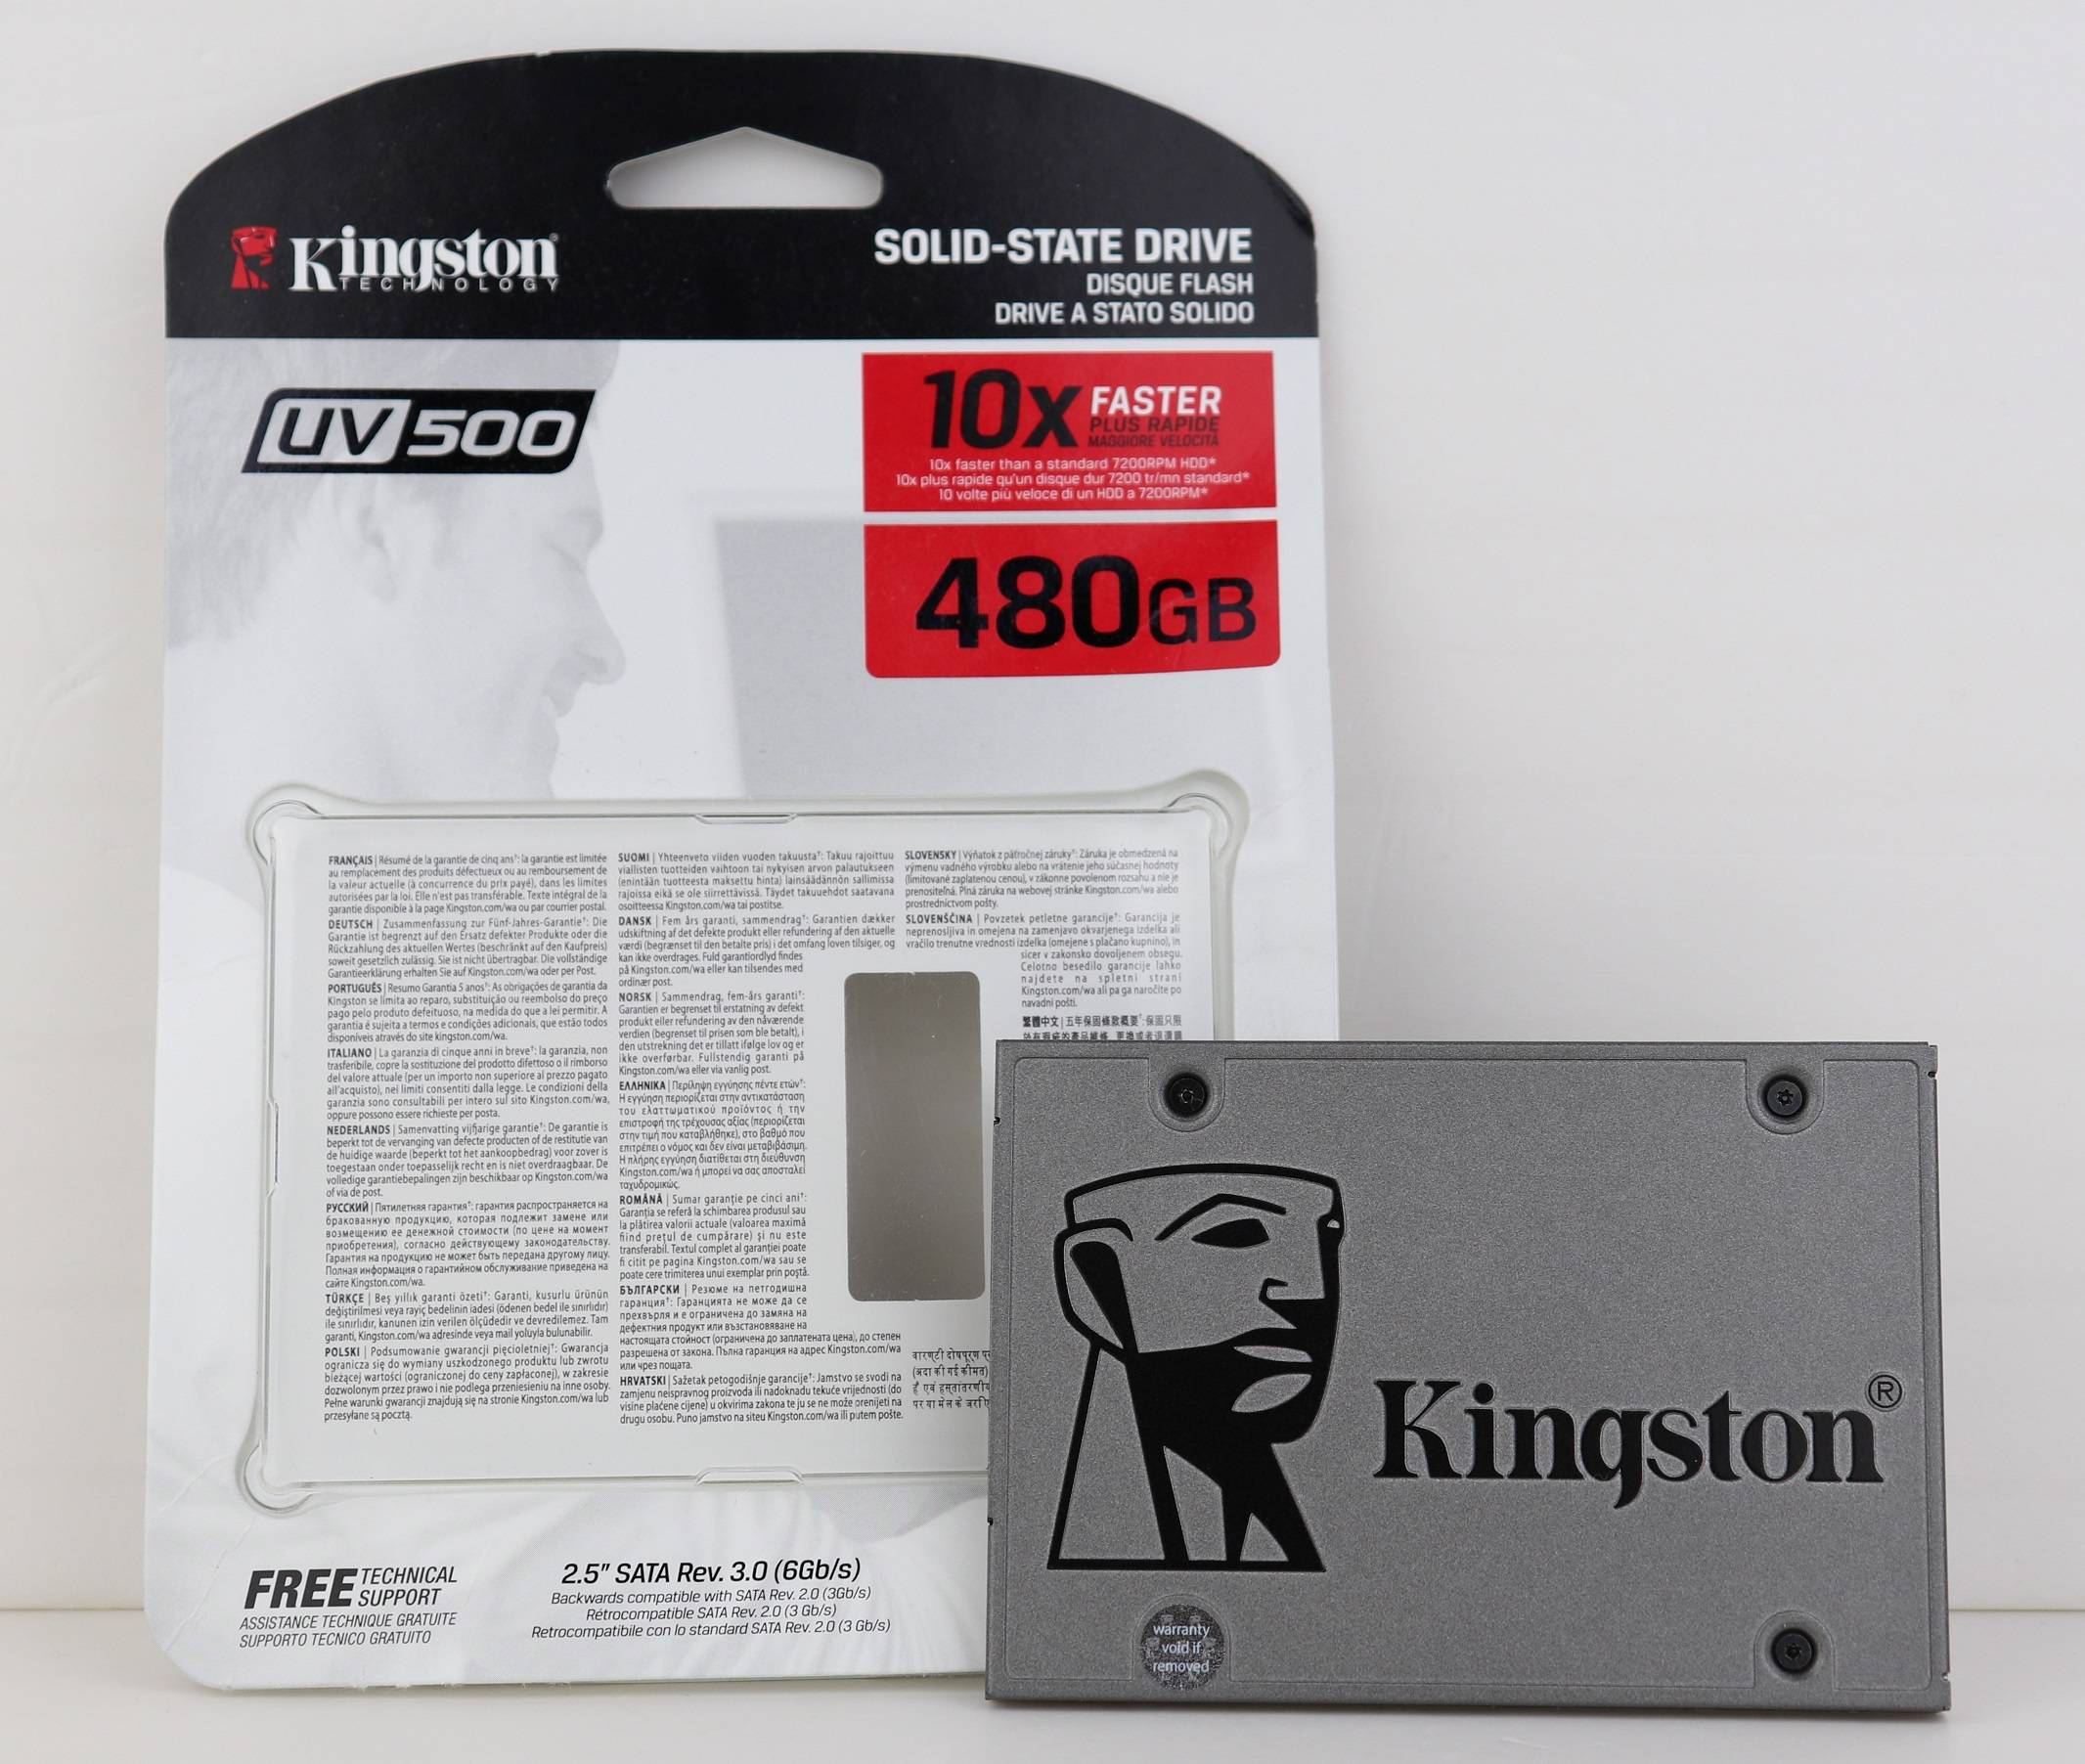 arm cash Alarming Unboxing and Review of Kingston UV500 480GB SATA SSD | UnbxTech